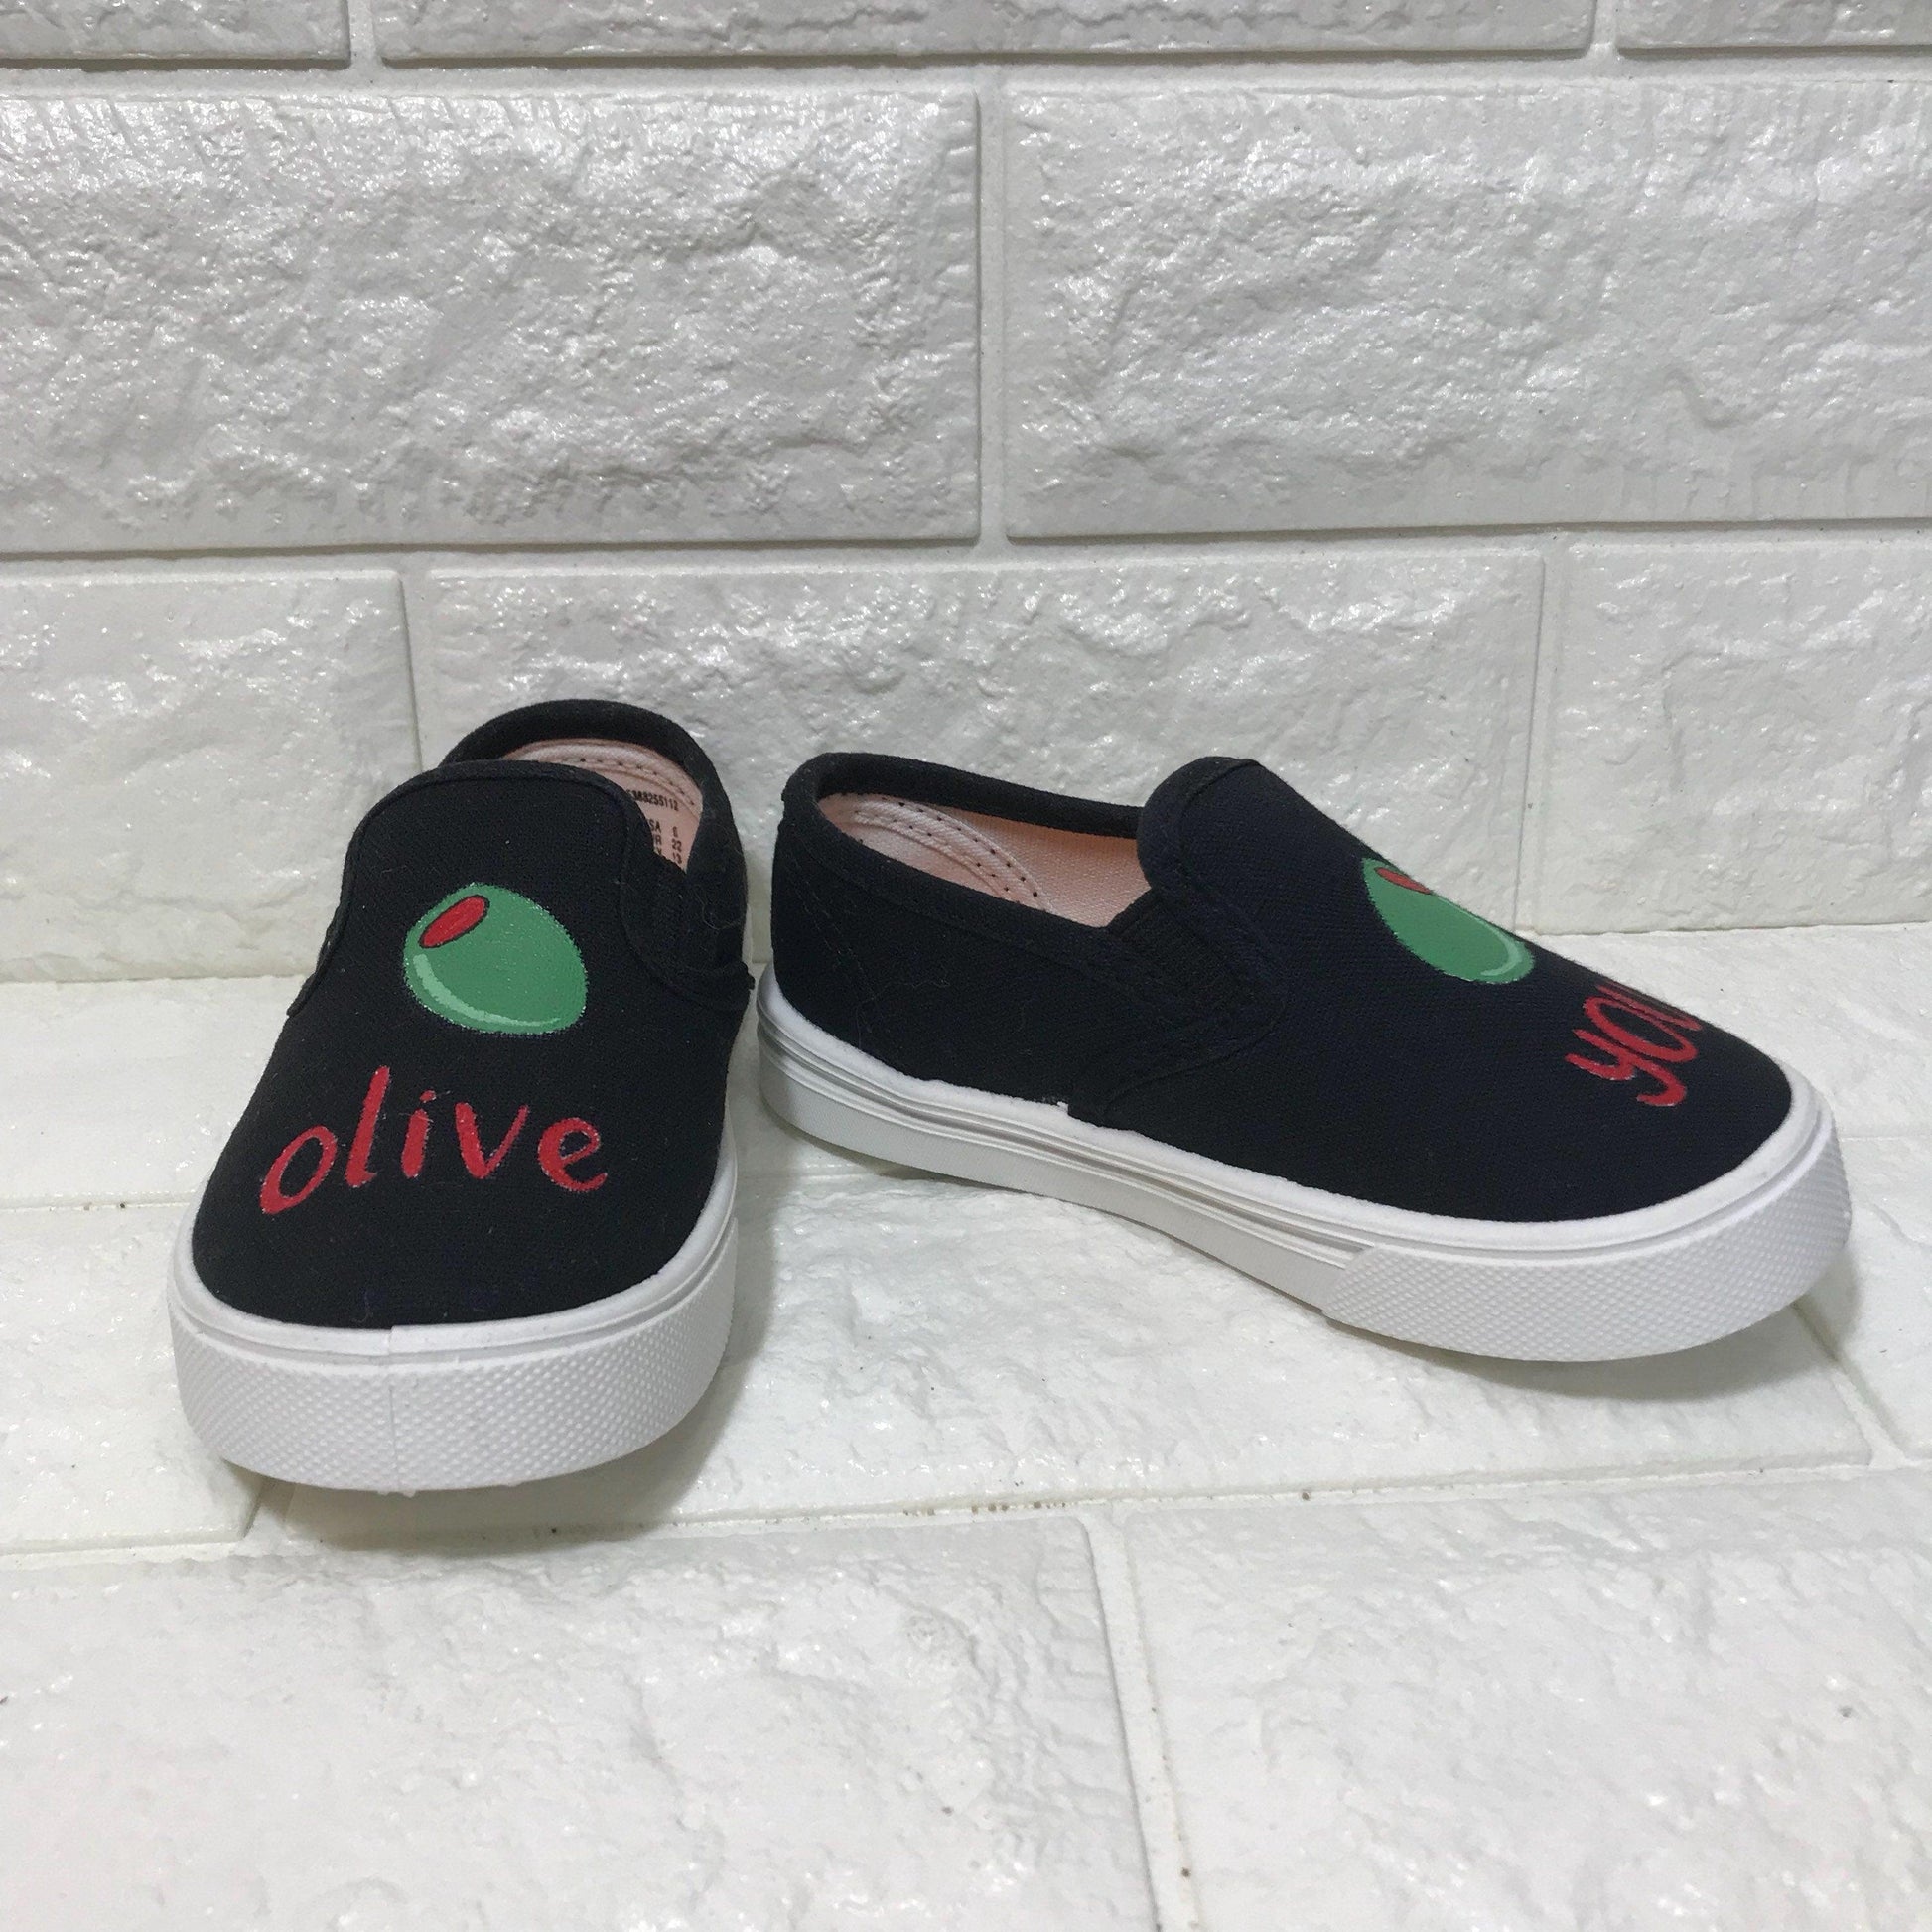 Olive You Shoes